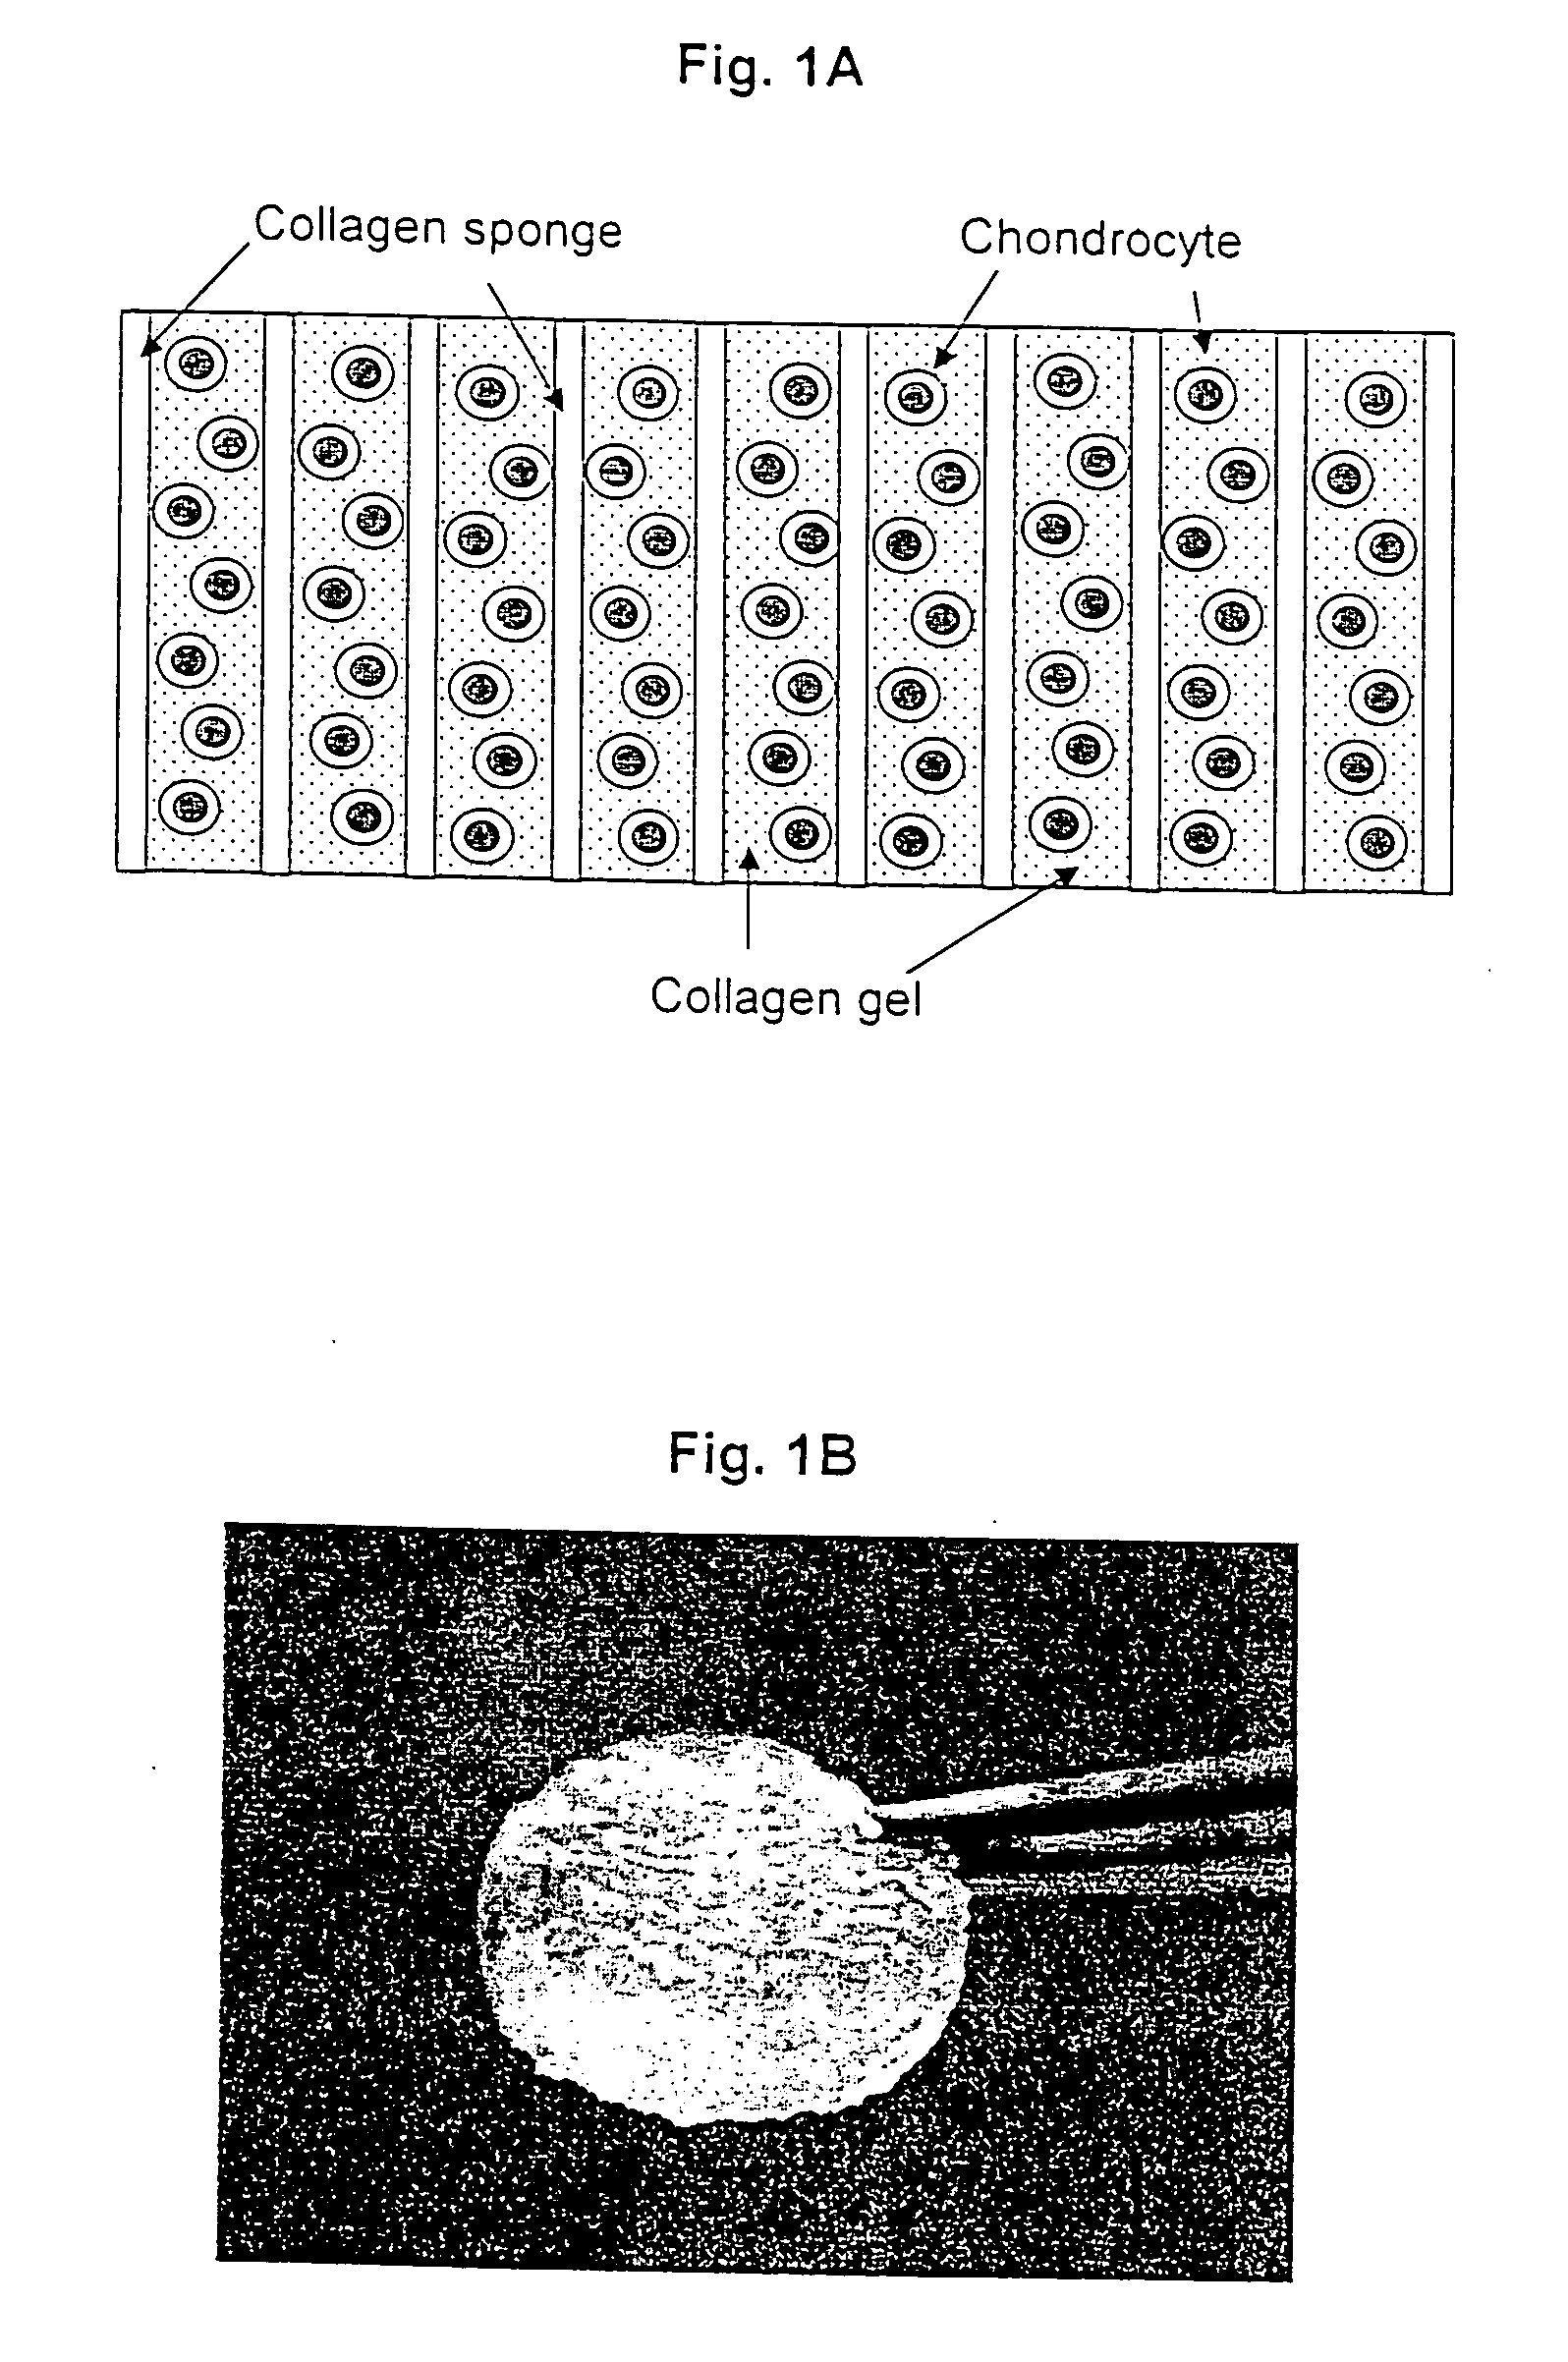 Method for preparation of neo-cartilage constructs